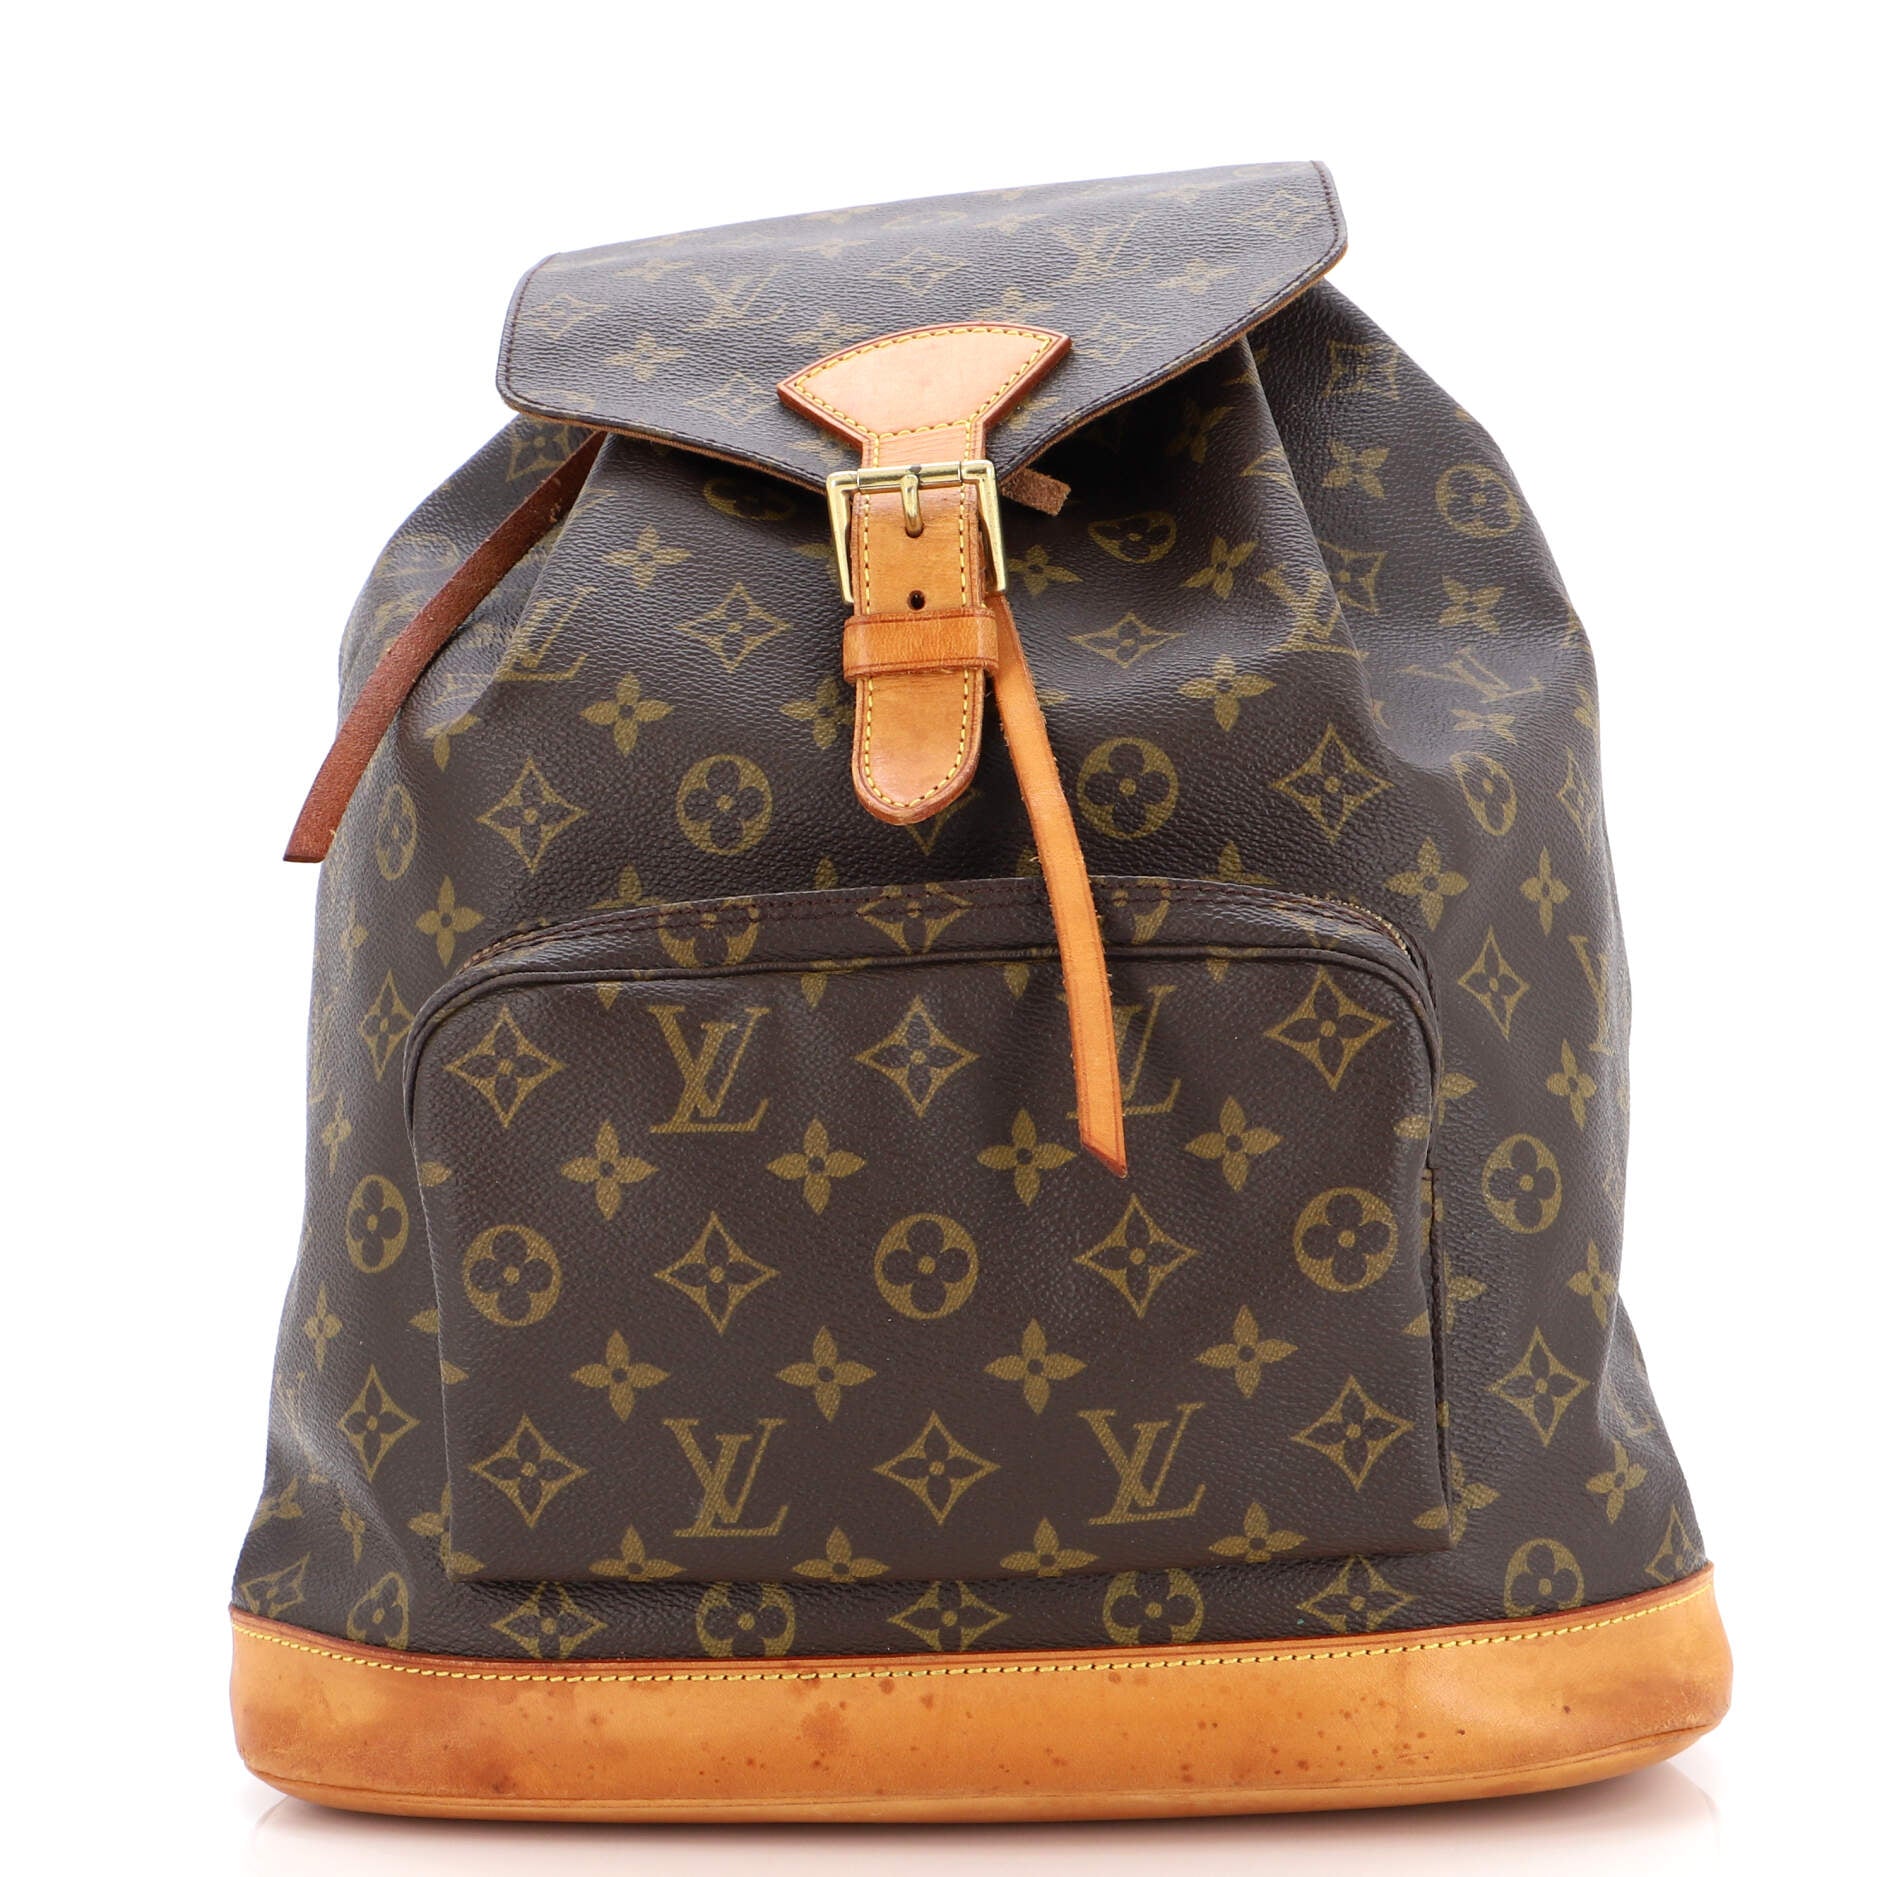 Louis Vuitton 2003 pre-owned Montsouris GM Backpack - Farfetch